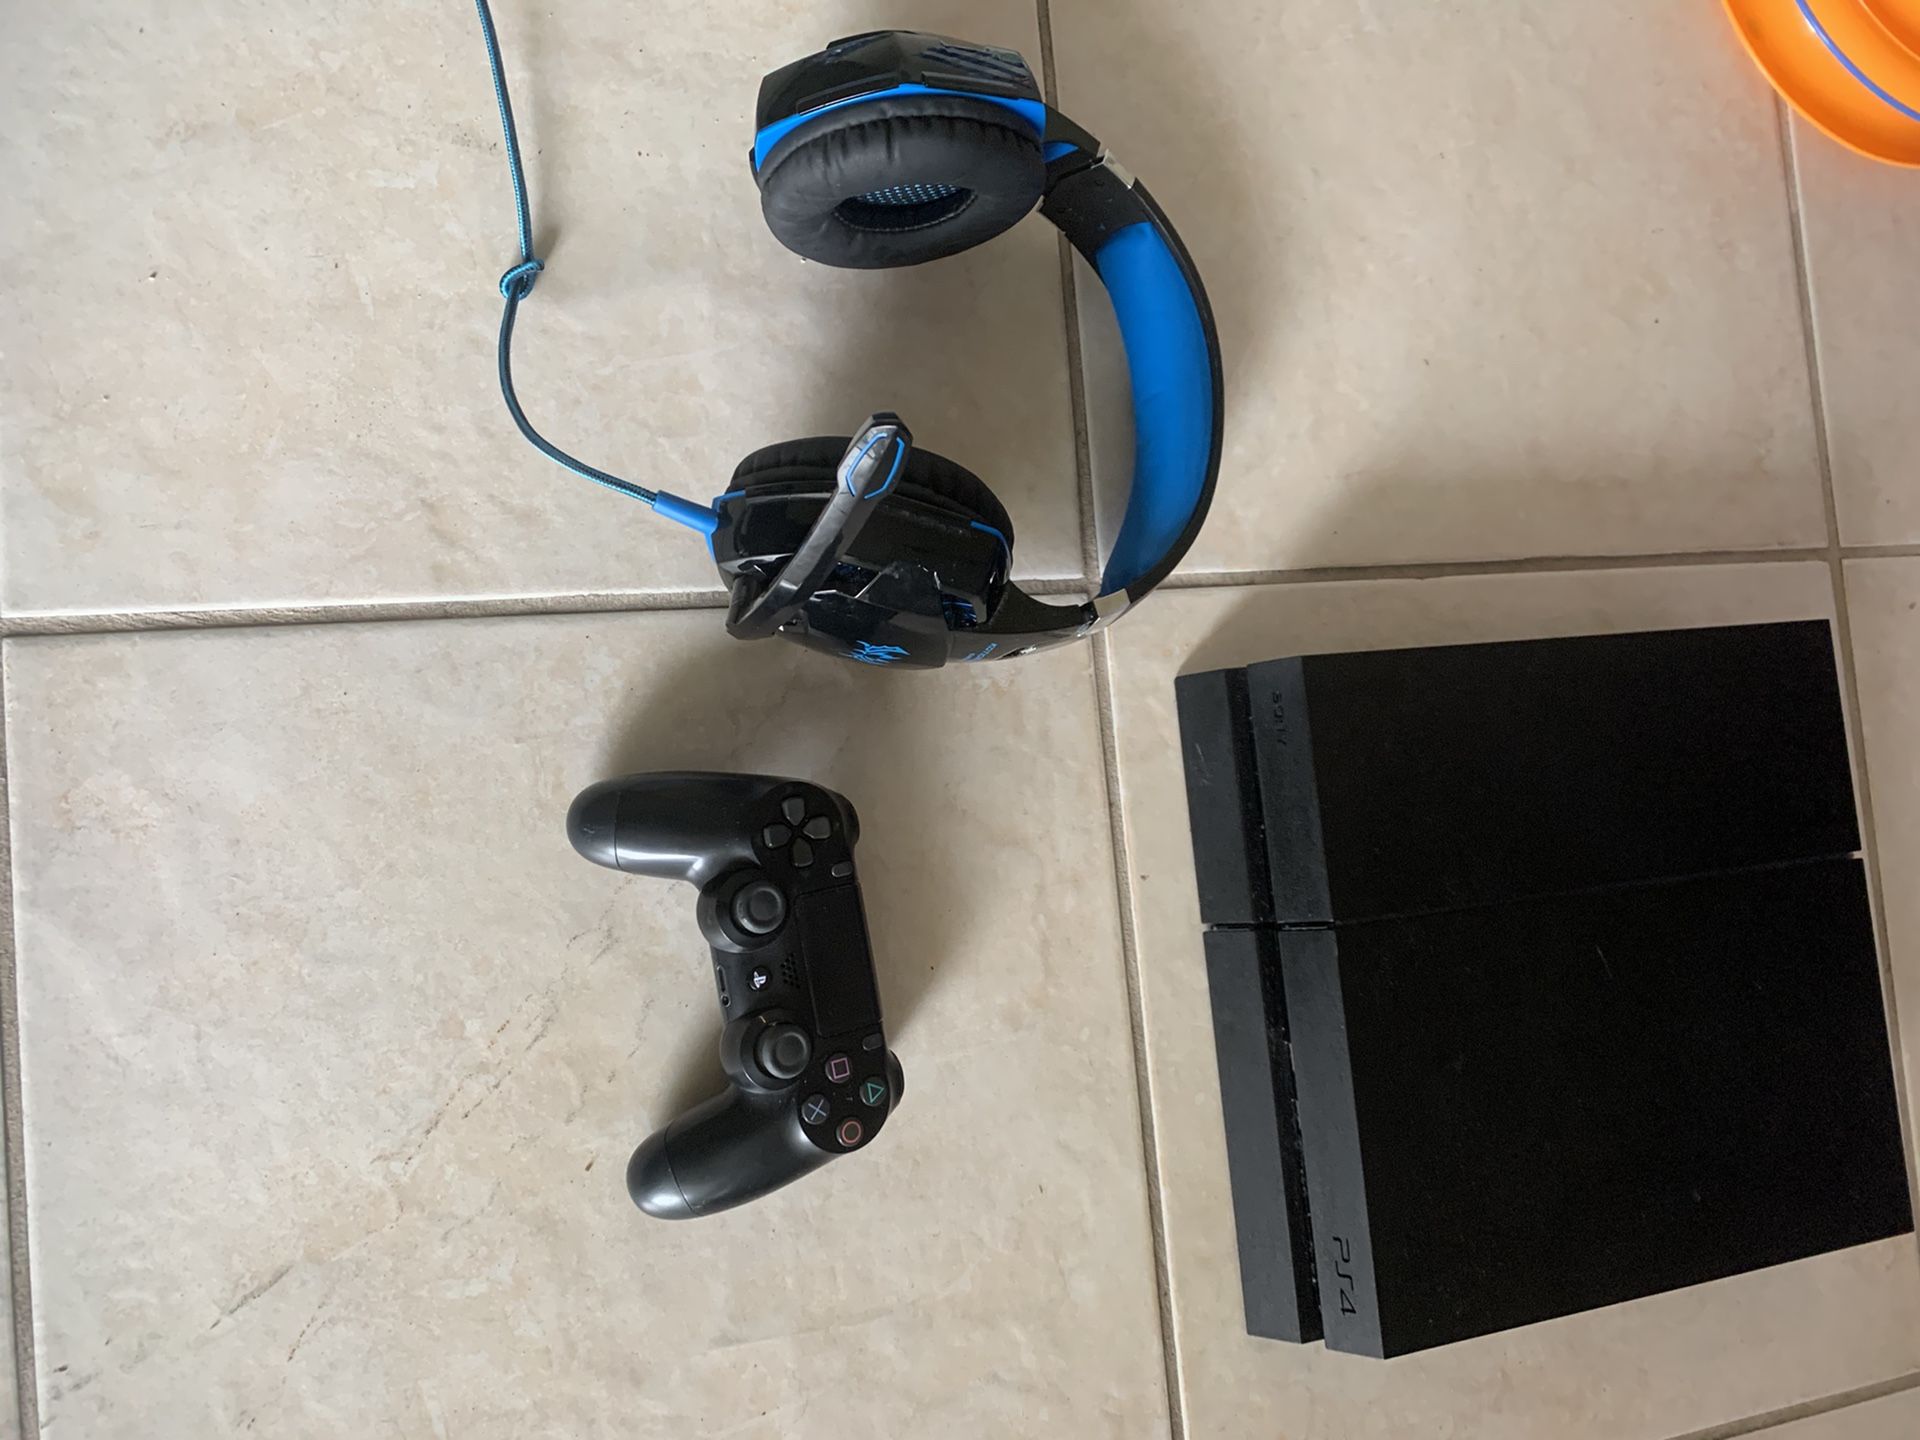 PS4 500mb with controller and headphones